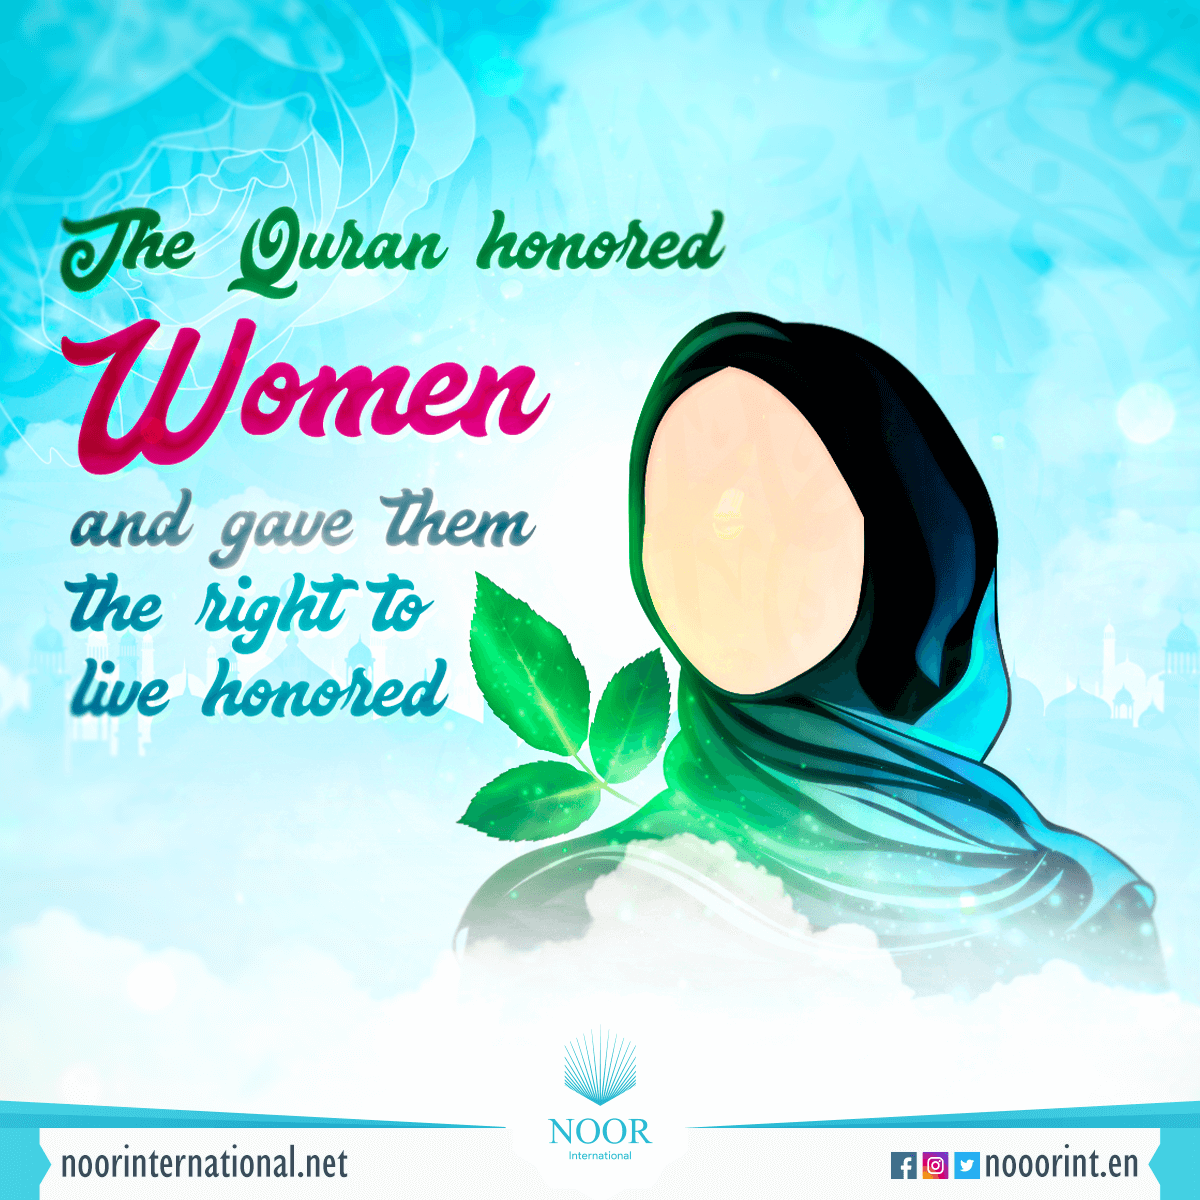 The Quran honored women and gave them the right to live honored